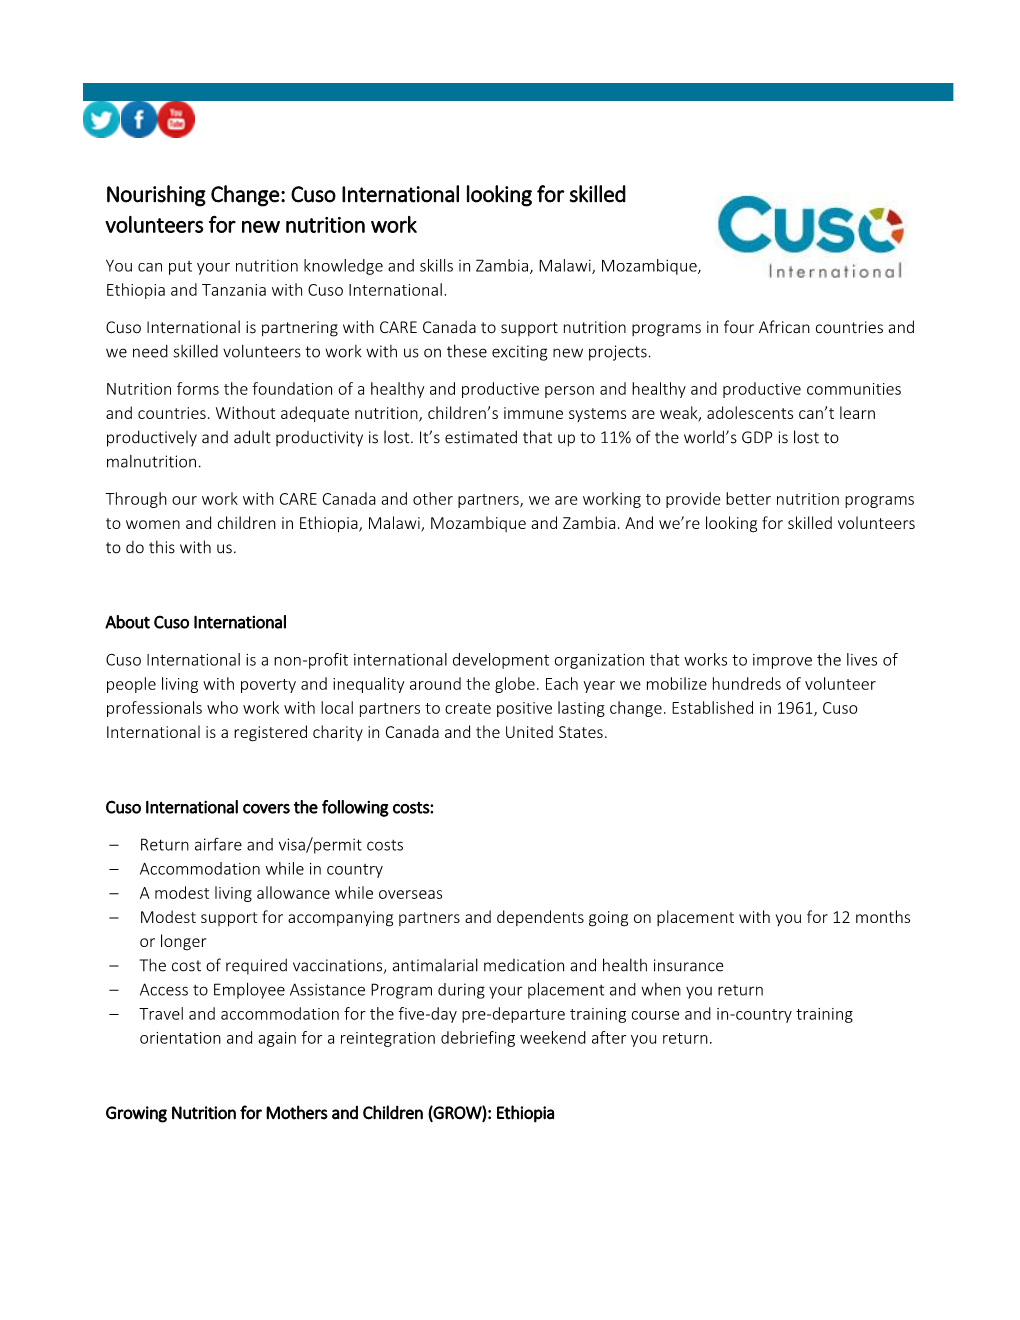 Nourishing Change: Cuso International Looking for Skilled Volunteers for New Nutrition Work